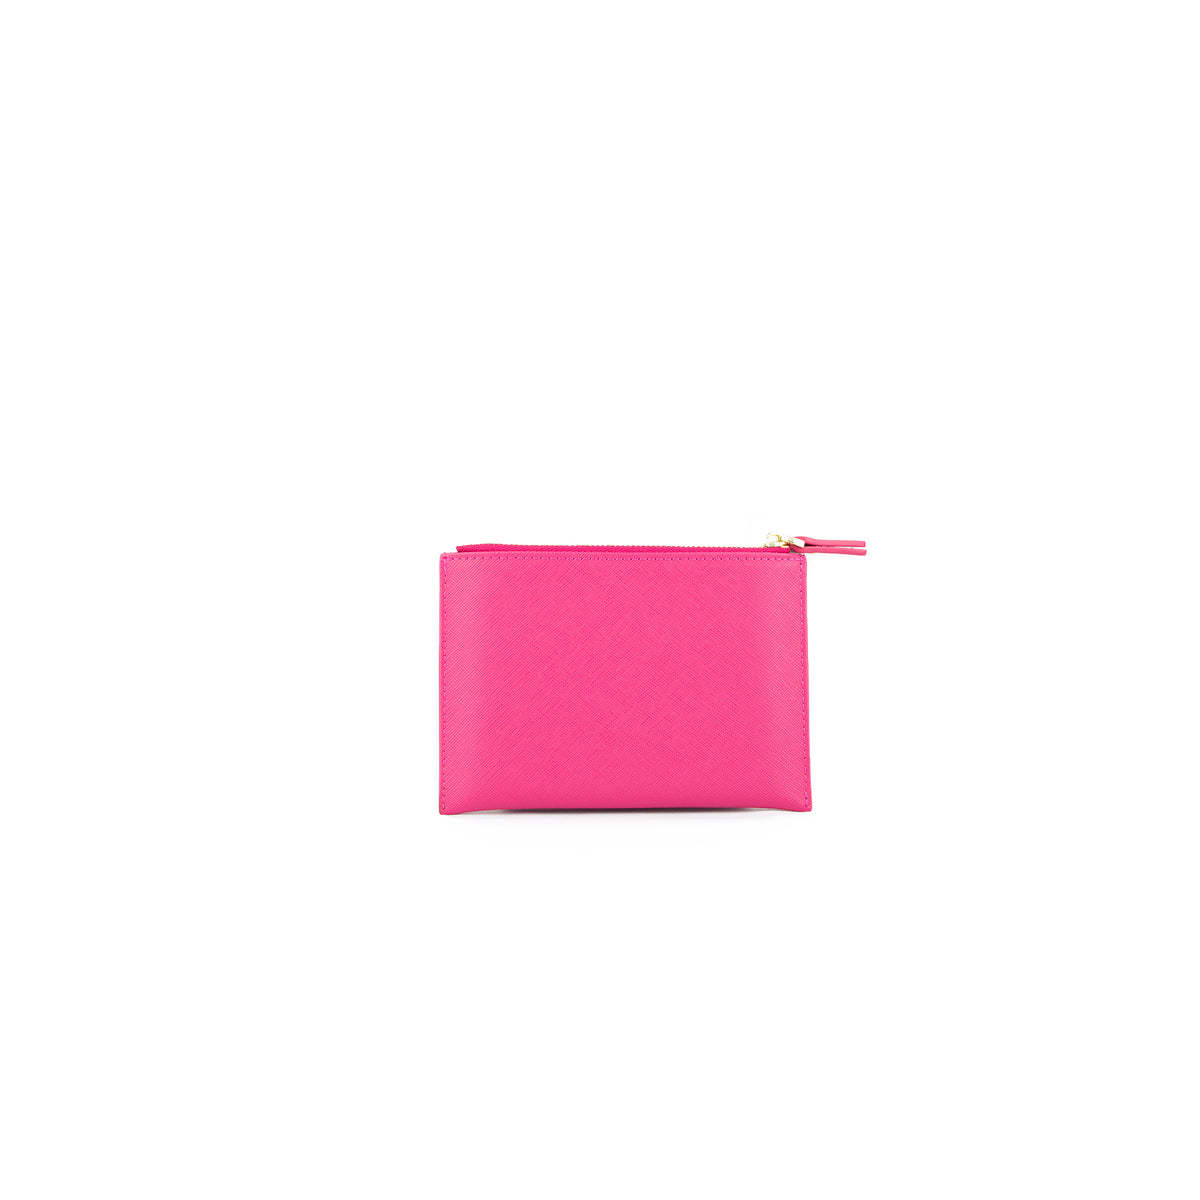 Personalised Coin Purse - Pink Saffiano Leather